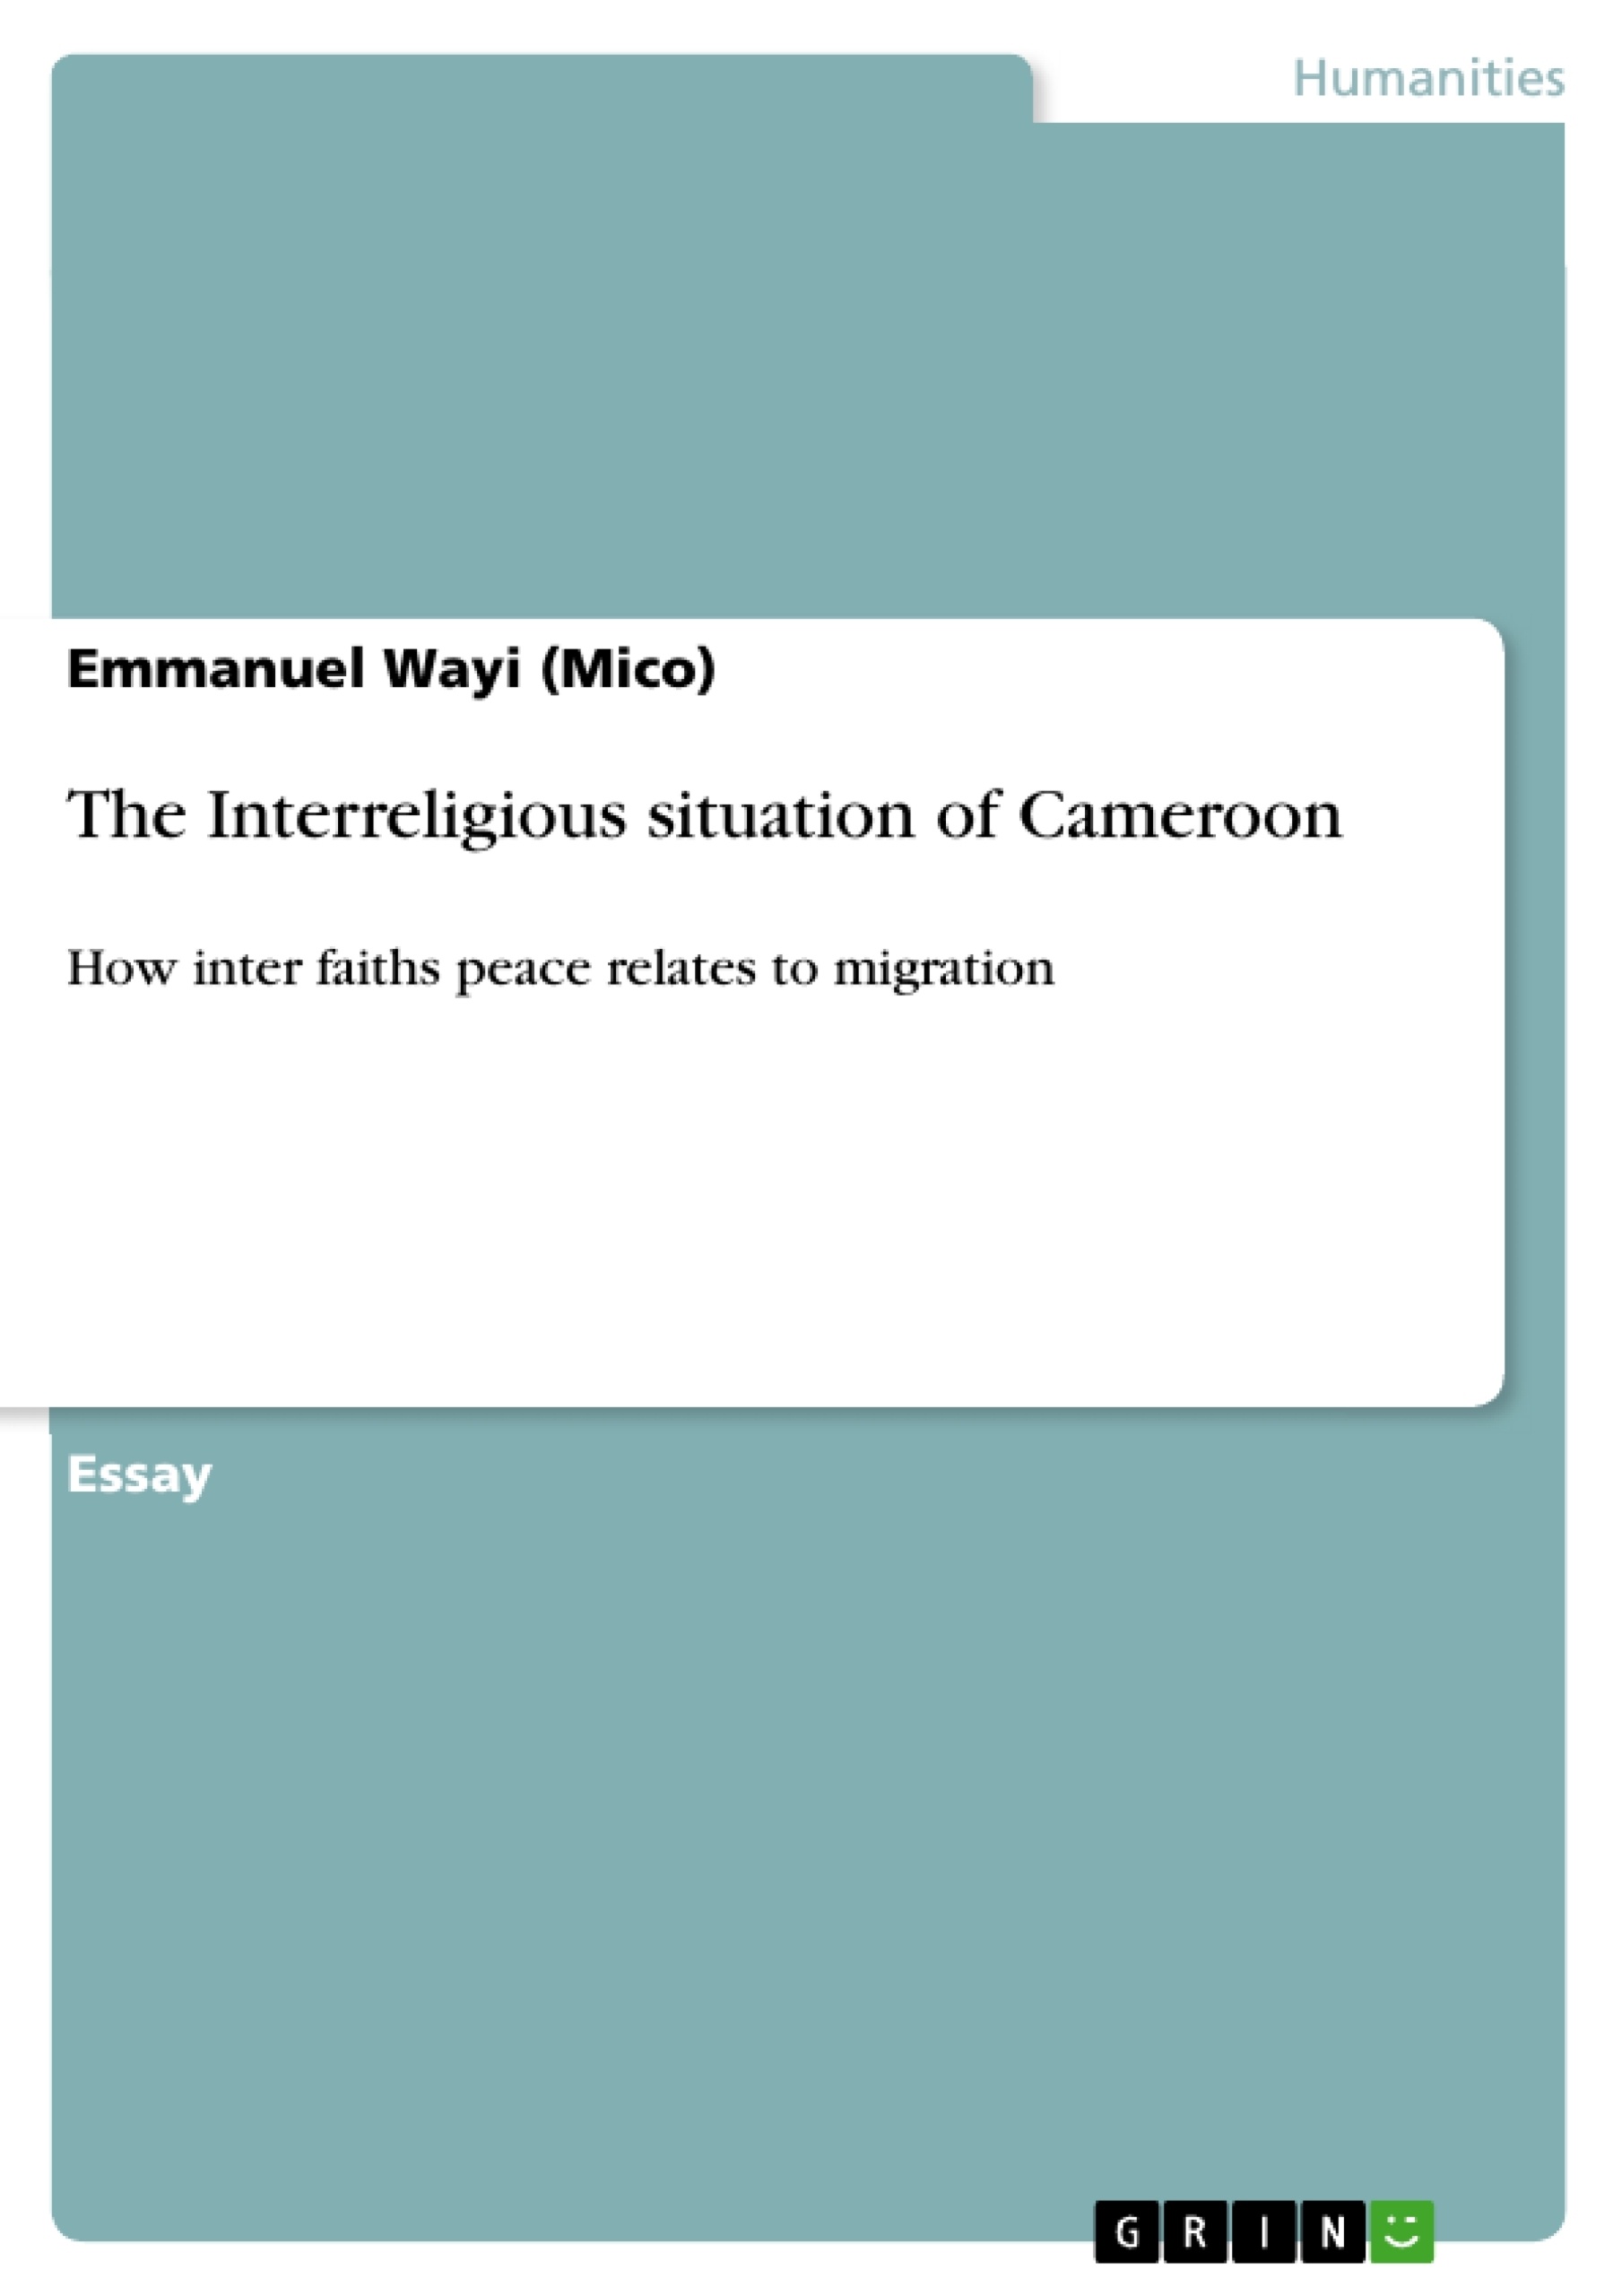 Title: The Interreligious situation of Cameroon